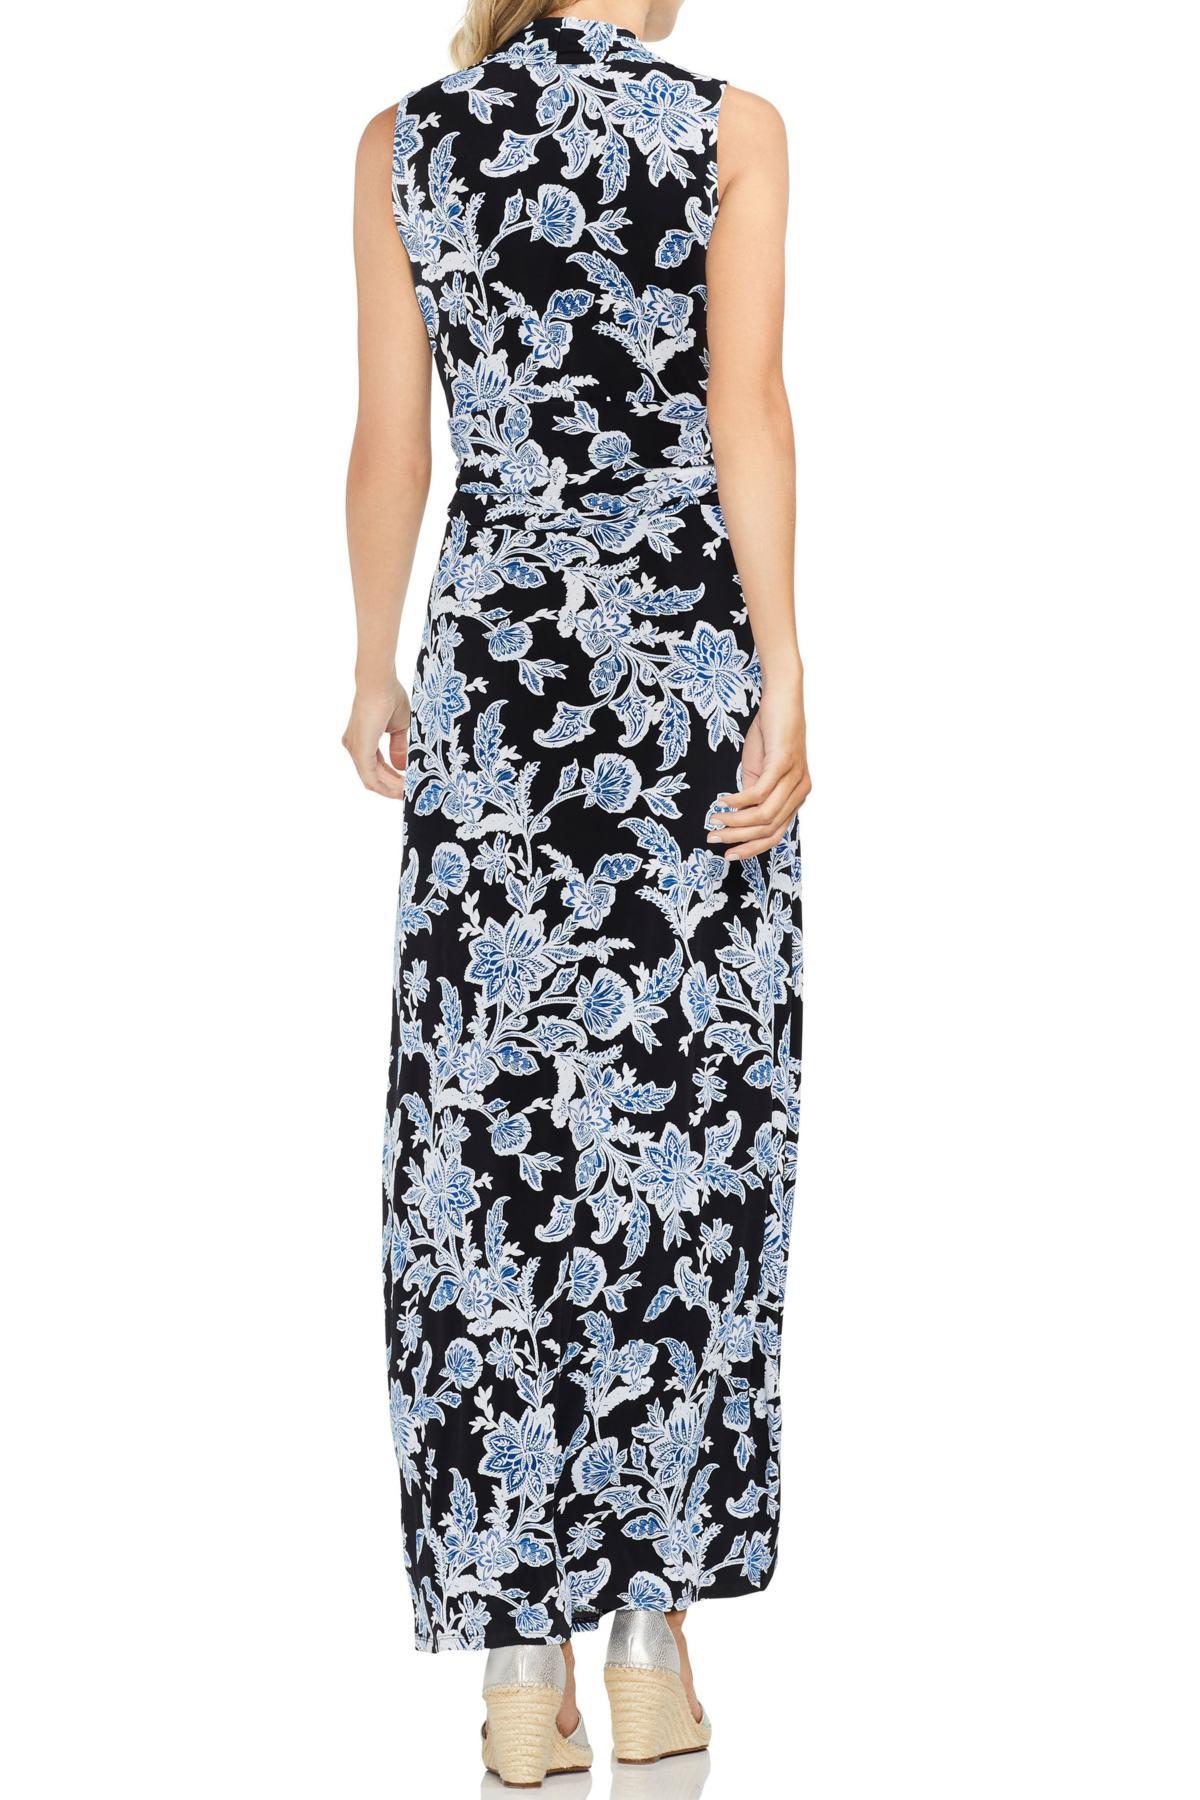 Lyst - Vince Camuto Maxi Dress in Black